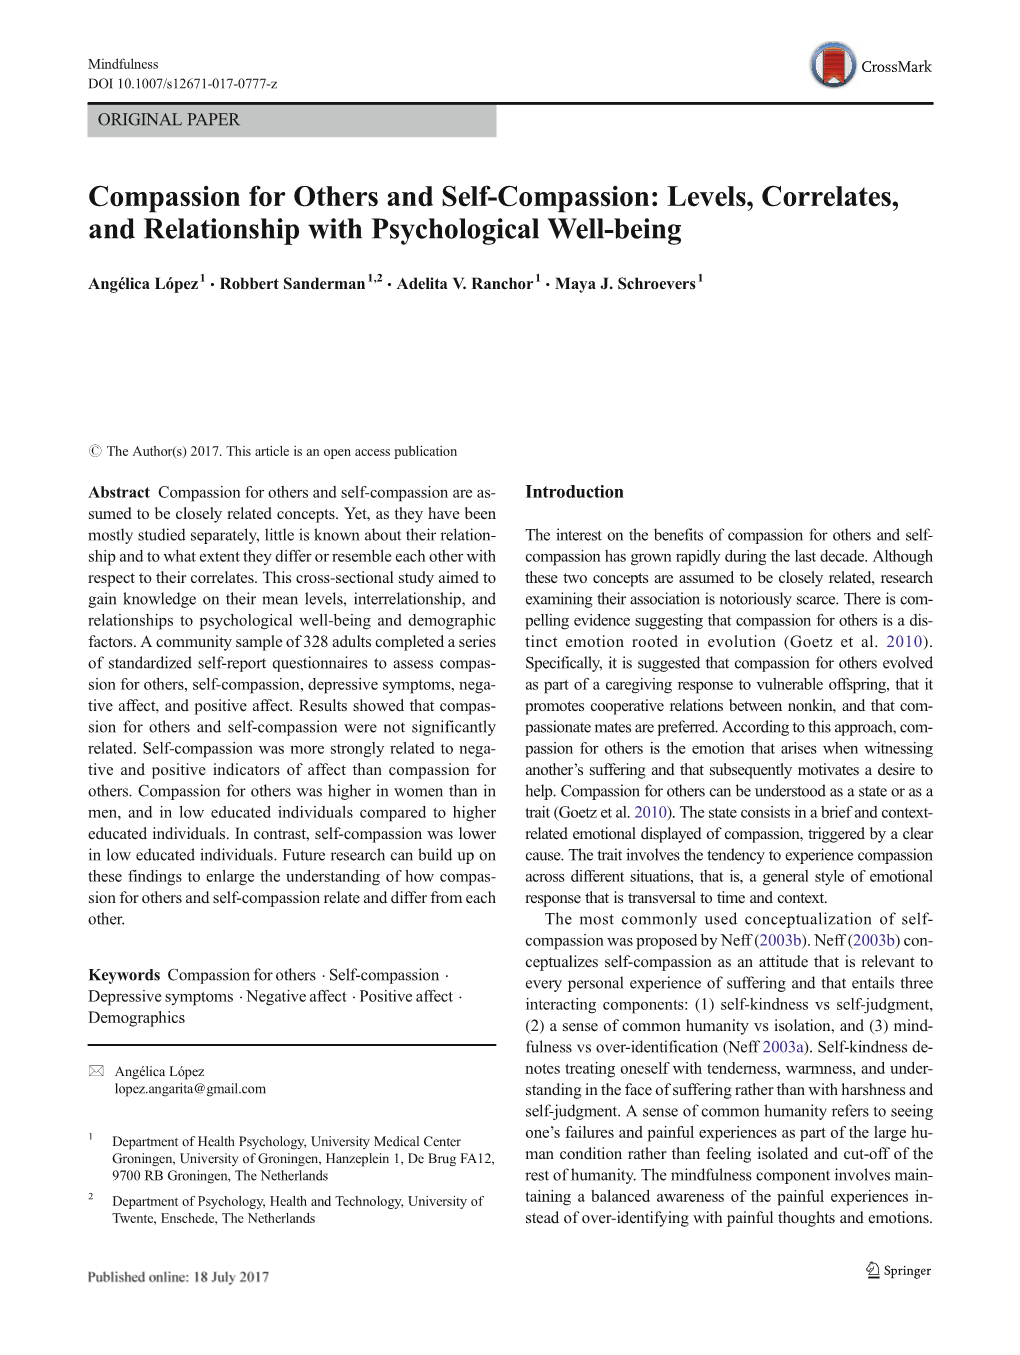 Compassion for Others and Self-Compassion: Levels, Correlates, and Relationship with Psychological Well-Being